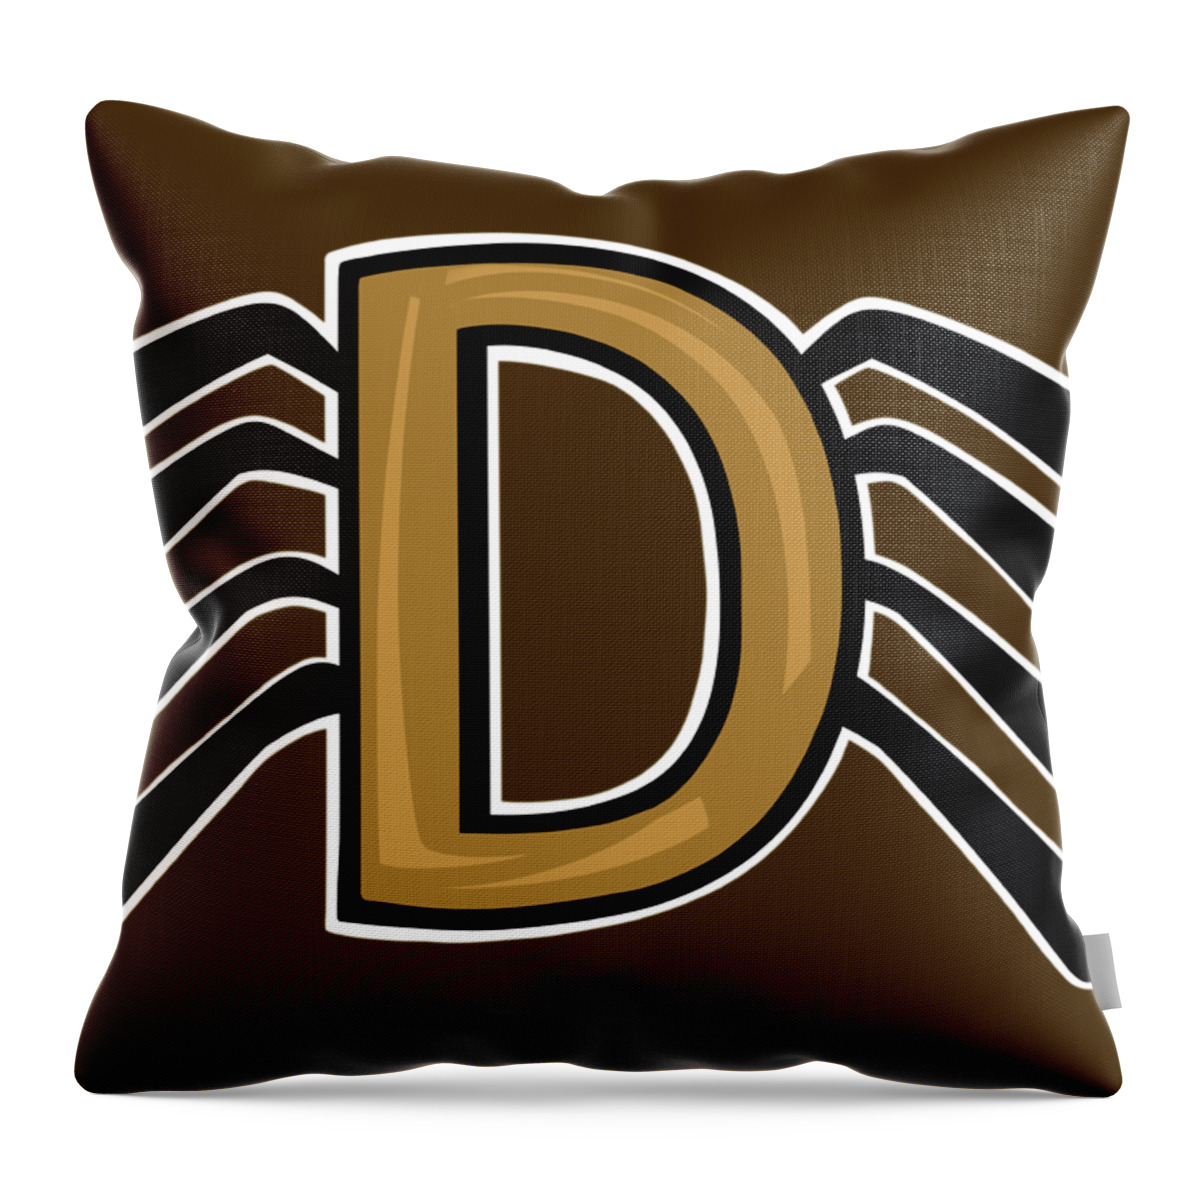 Daddy Long Legs Throw Pillow featuring the digital art Daddy Long Legs Logo by Demitrius Motion Bullock